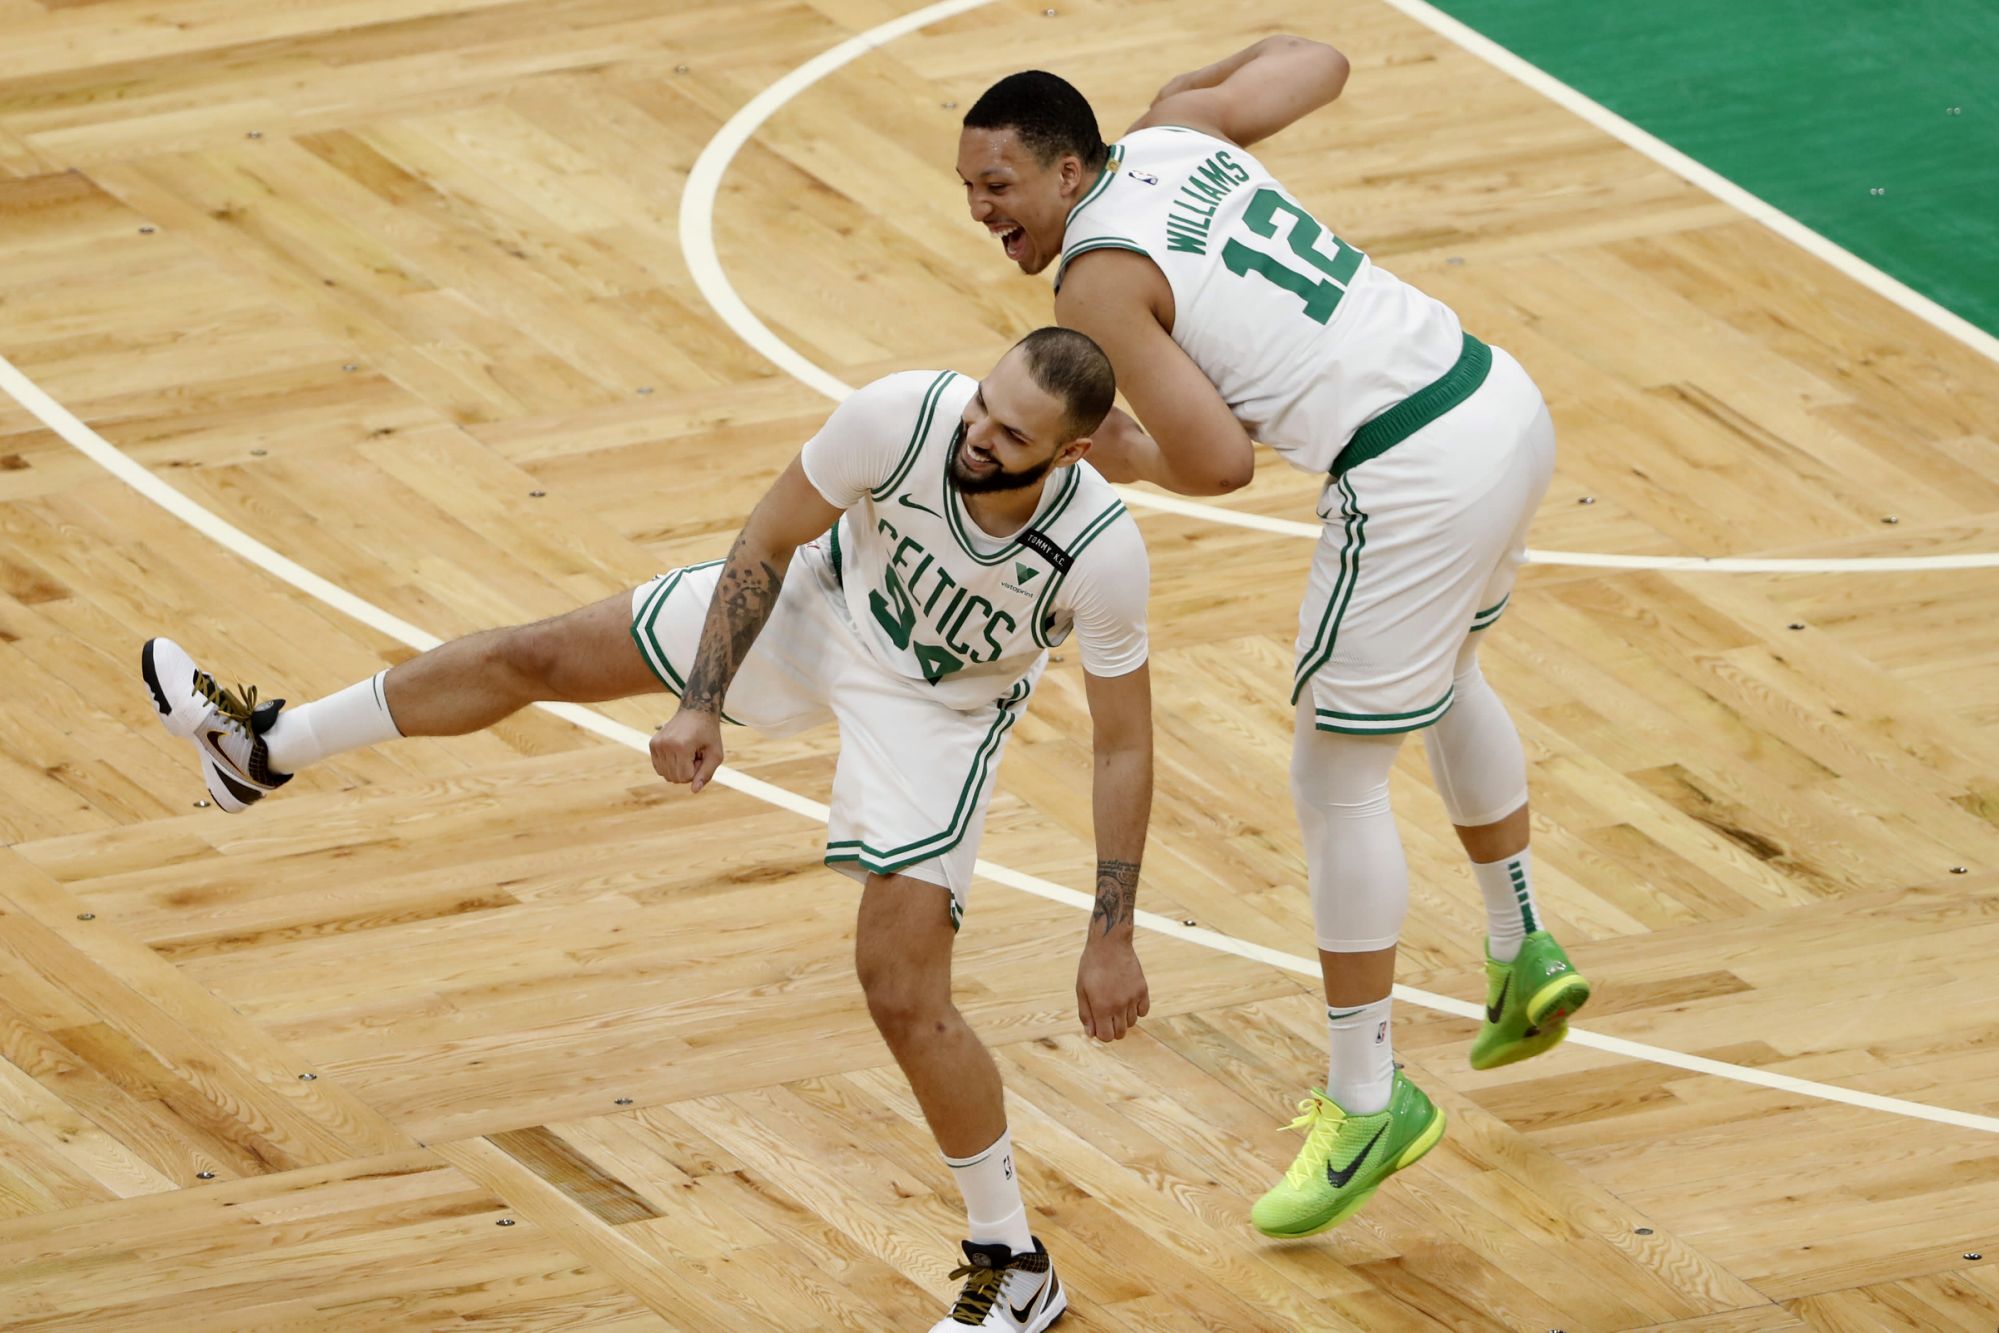 Fournier is the second Boston Celtic in 25 seasons to achieve this accomplishment